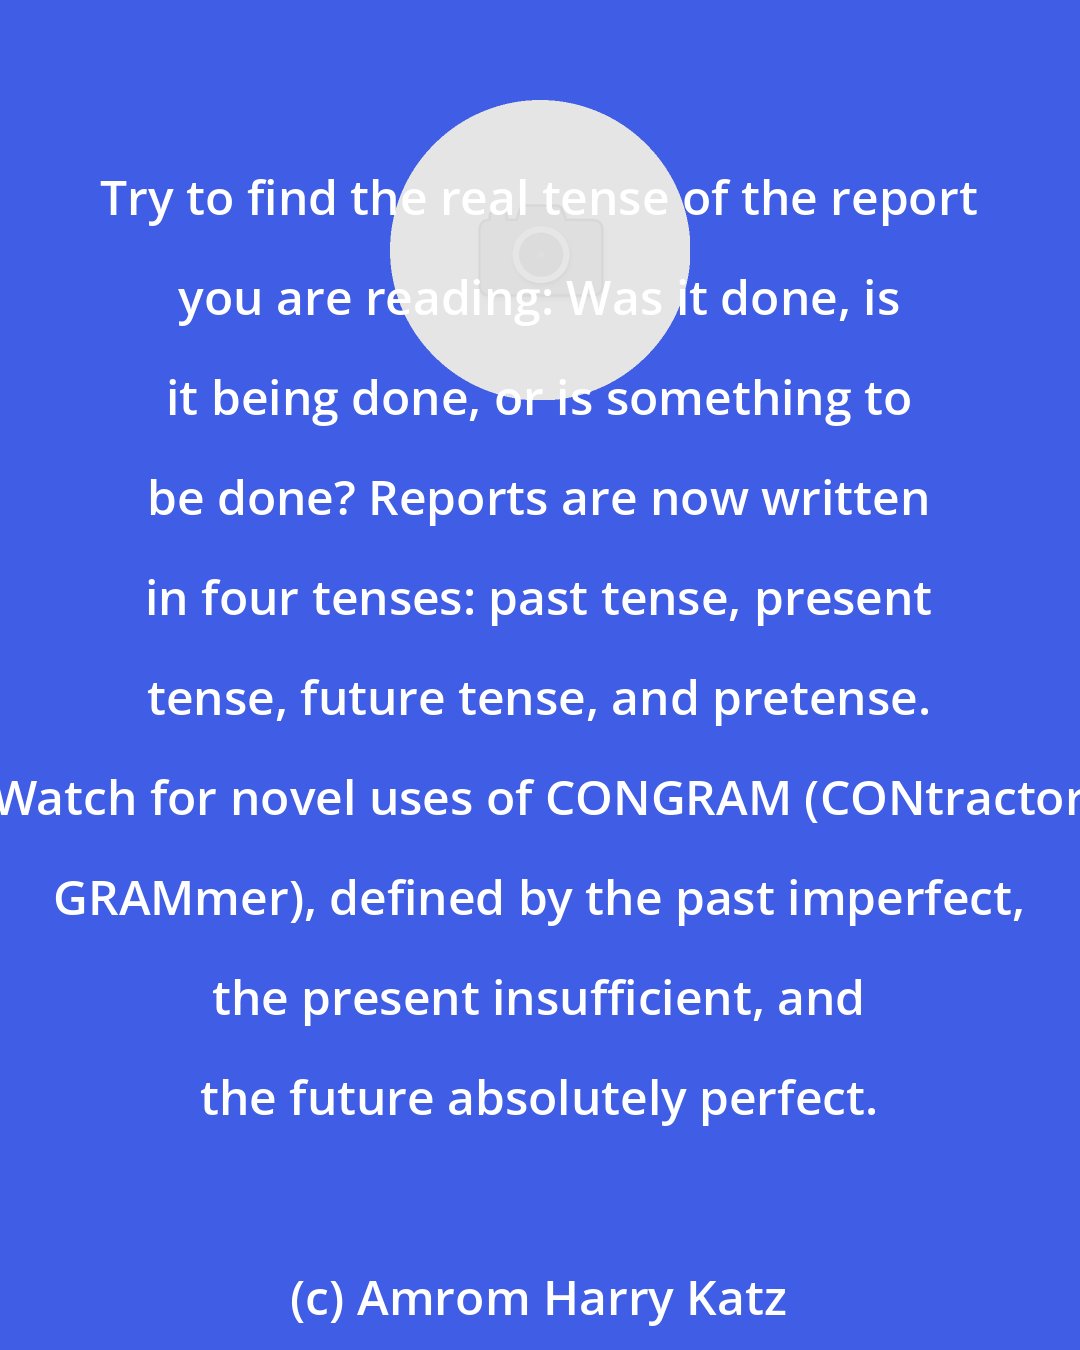 Amrom Harry Katz: Try to find the real tense of the report you are reading: Was it done, is it being done, or is something to be done? Reports are now written in four tenses: past tense, present tense, future tense, and pretense. Watch for novel uses of CONGRAM (CONtractor GRAMmer), defined by the past imperfect, the present insufficient, and the future absolutely perfect.